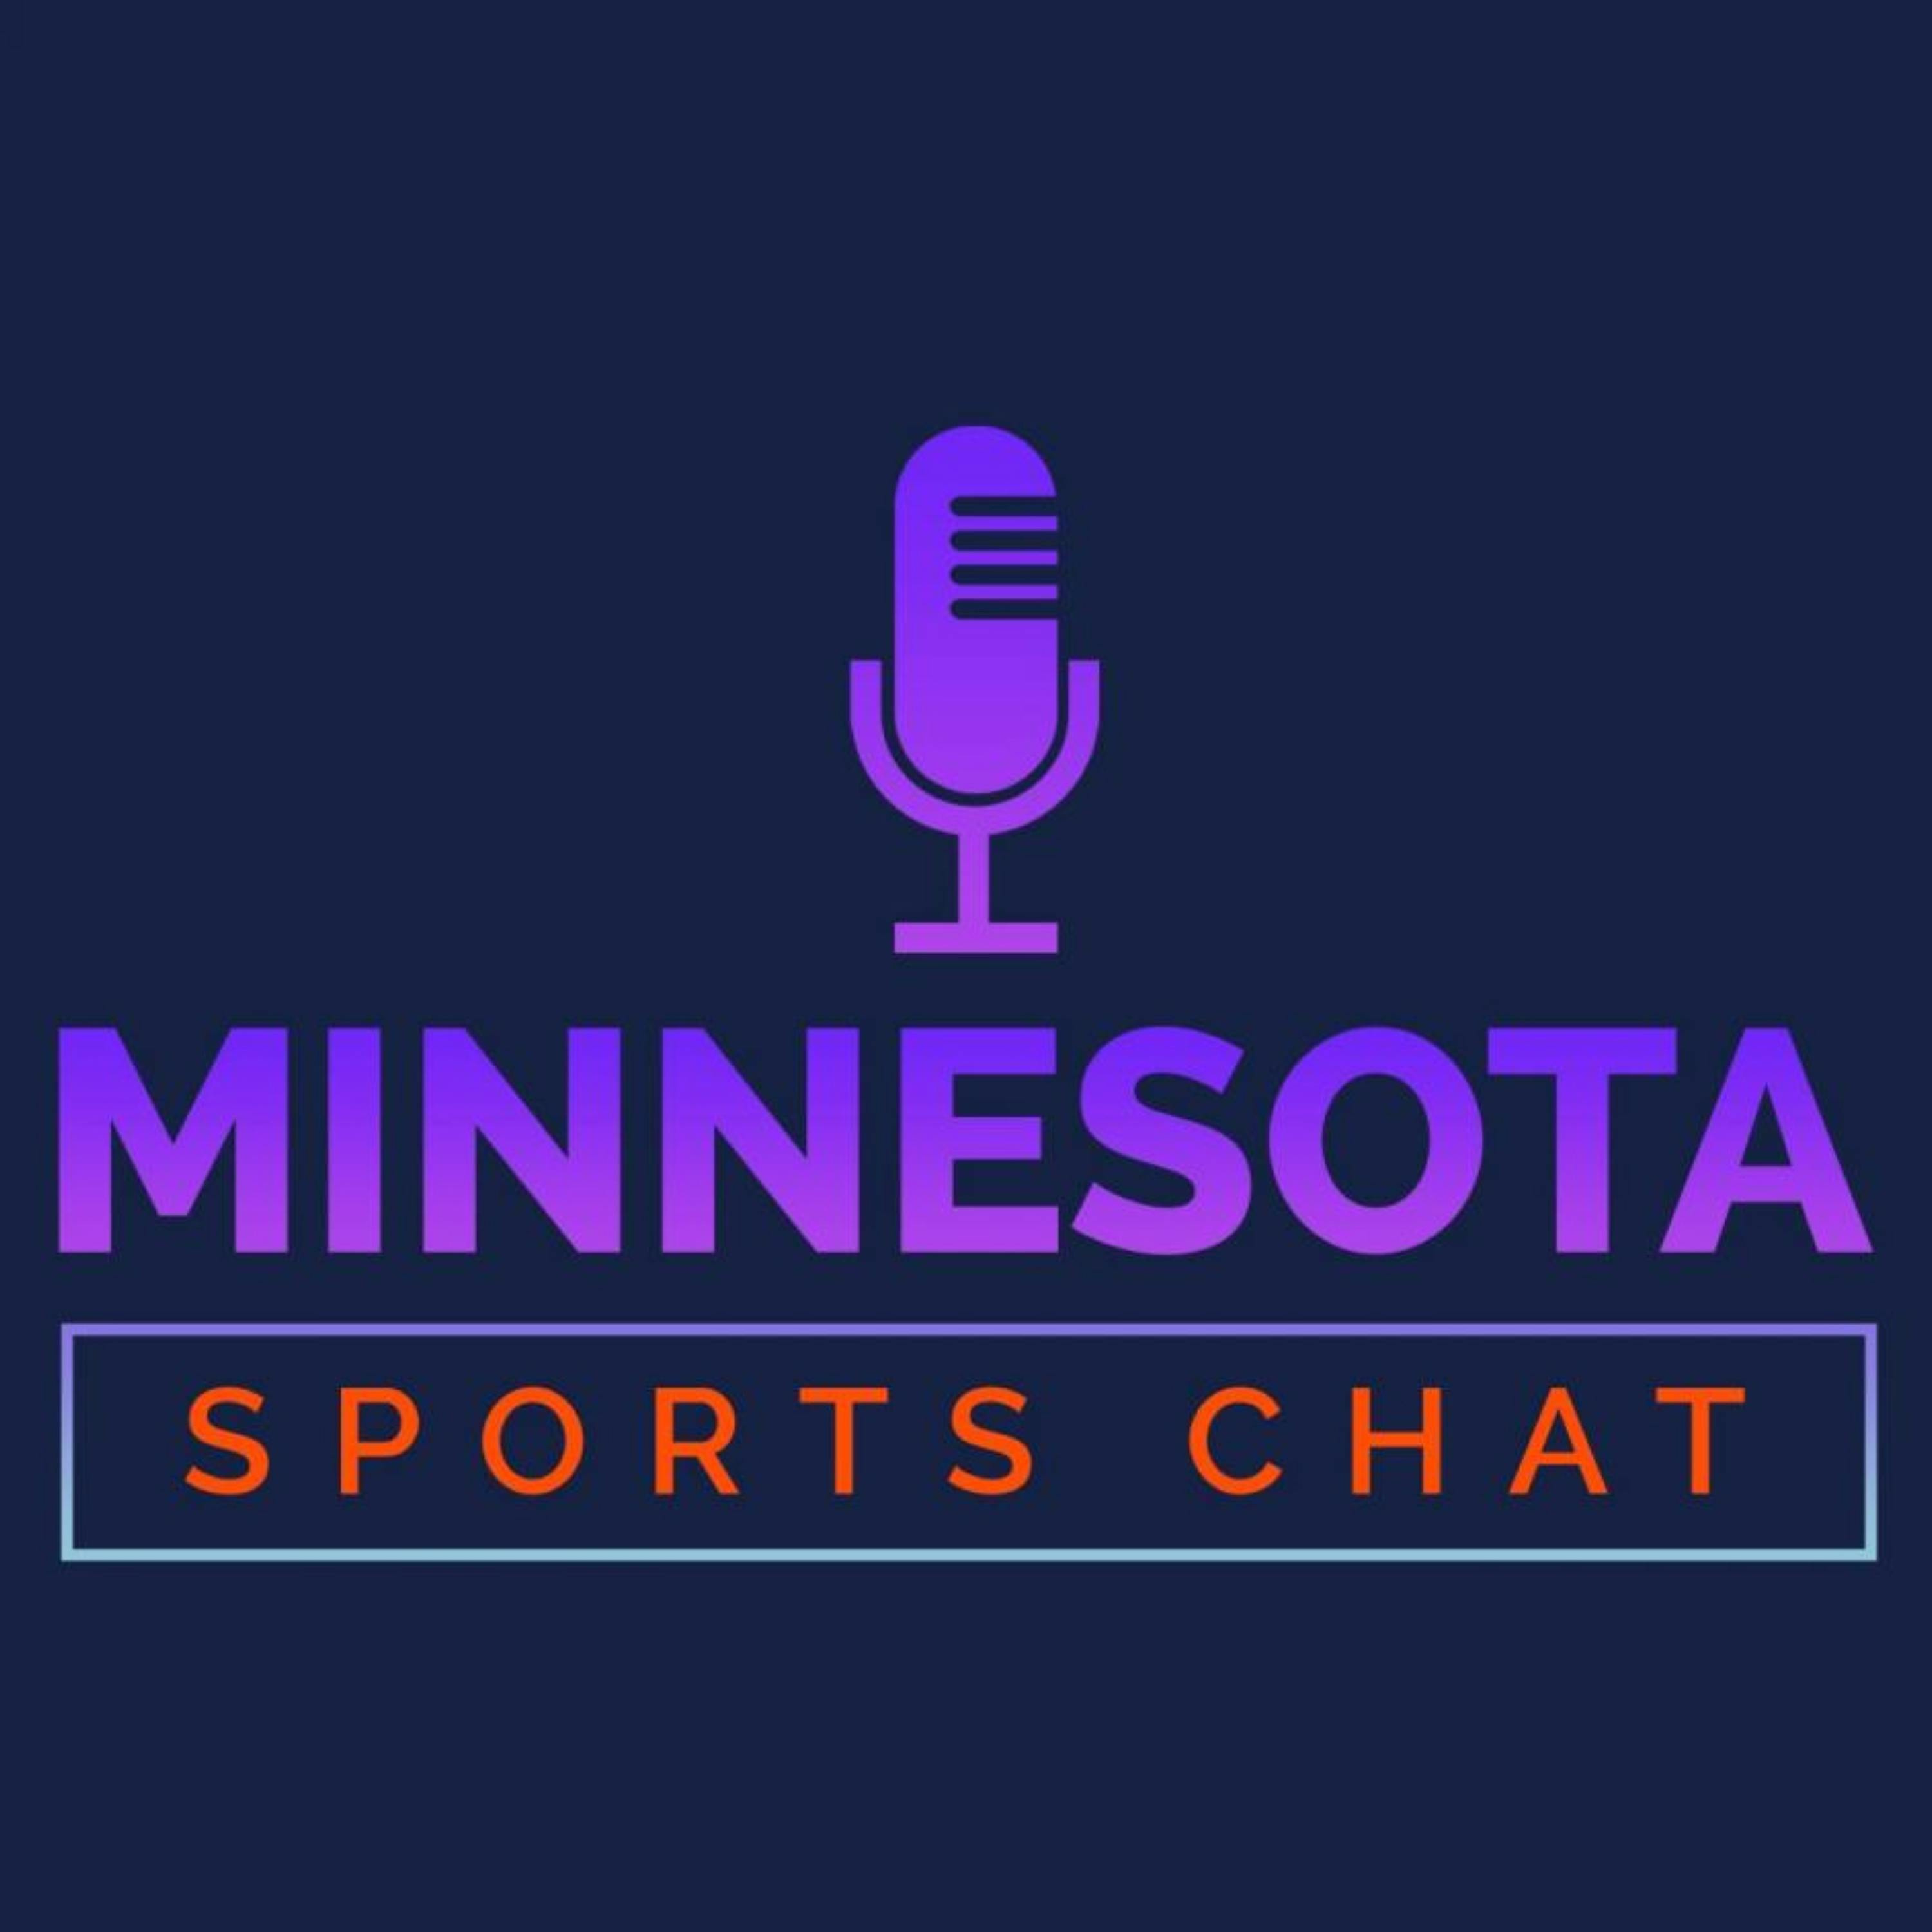 MINNESOTA SPORTS CHAT: Too early to talk Minnesota Golden Gophers football? - Edition 167